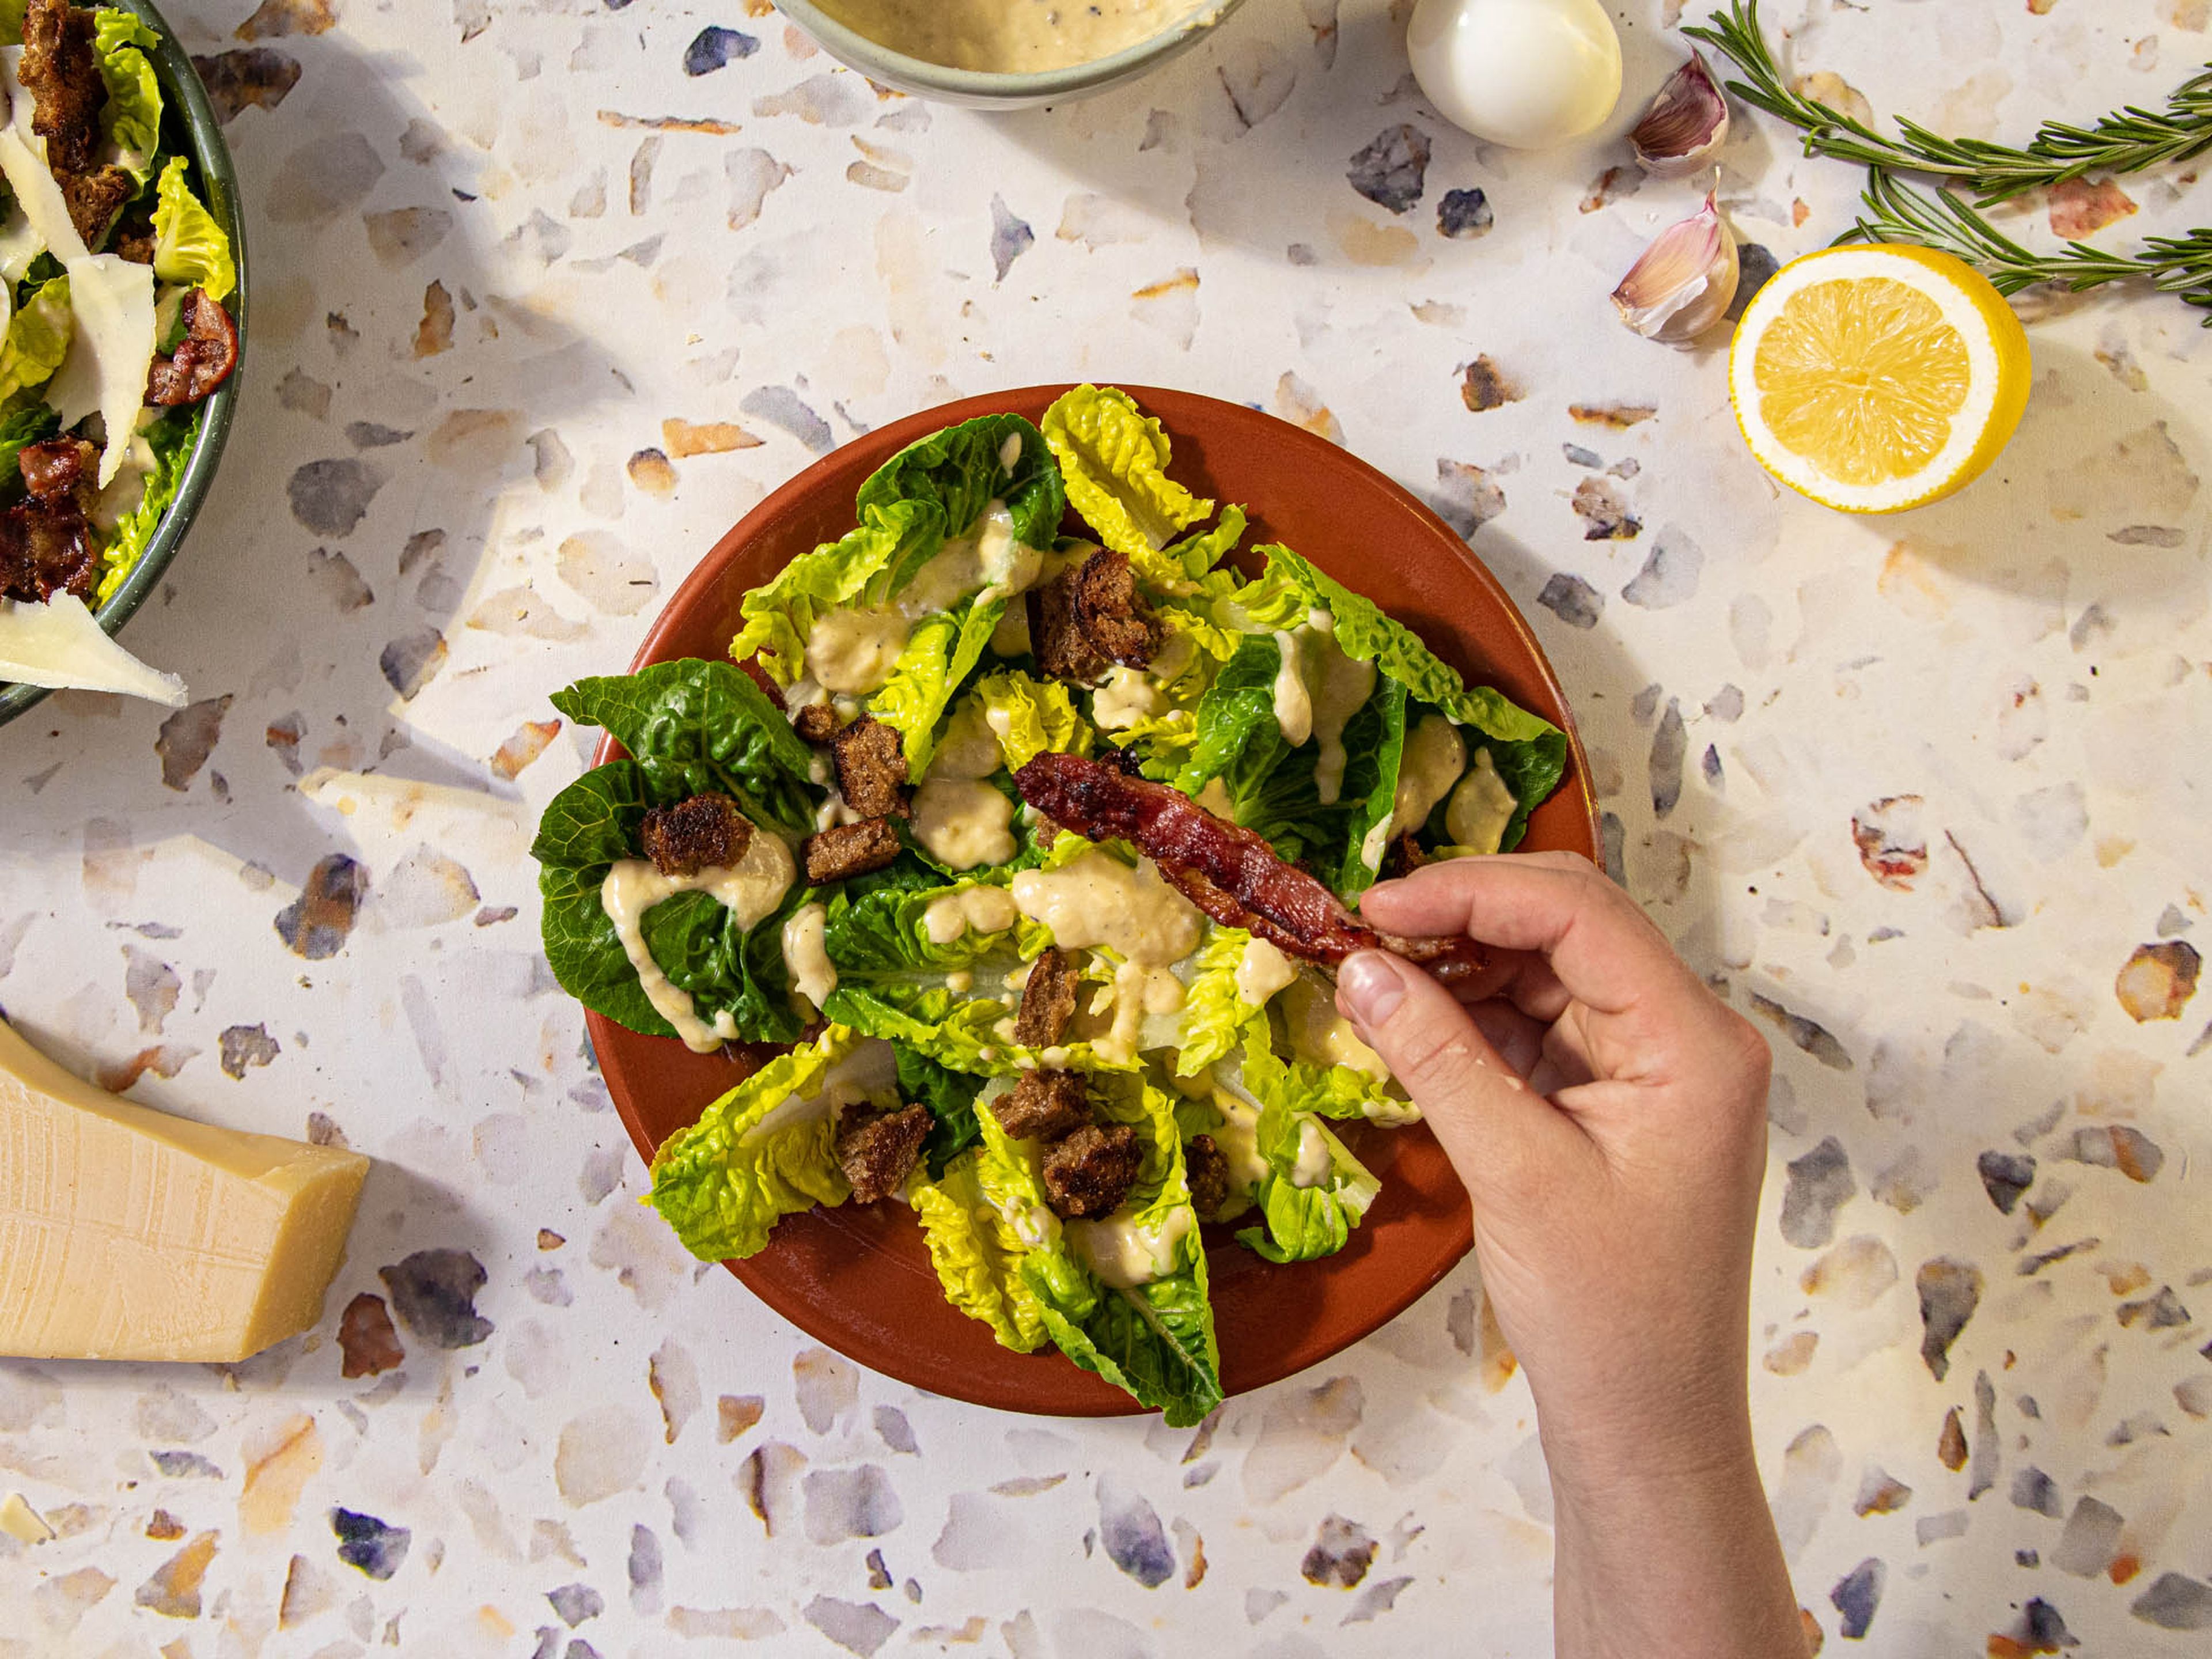 To assemble the salad, tear romaine leaves into a bowl, add croutons, pour dressing, and break the bacon into pieces on top, then add boiled eggs. Serve with extra grated Parmesan. Enjoy!